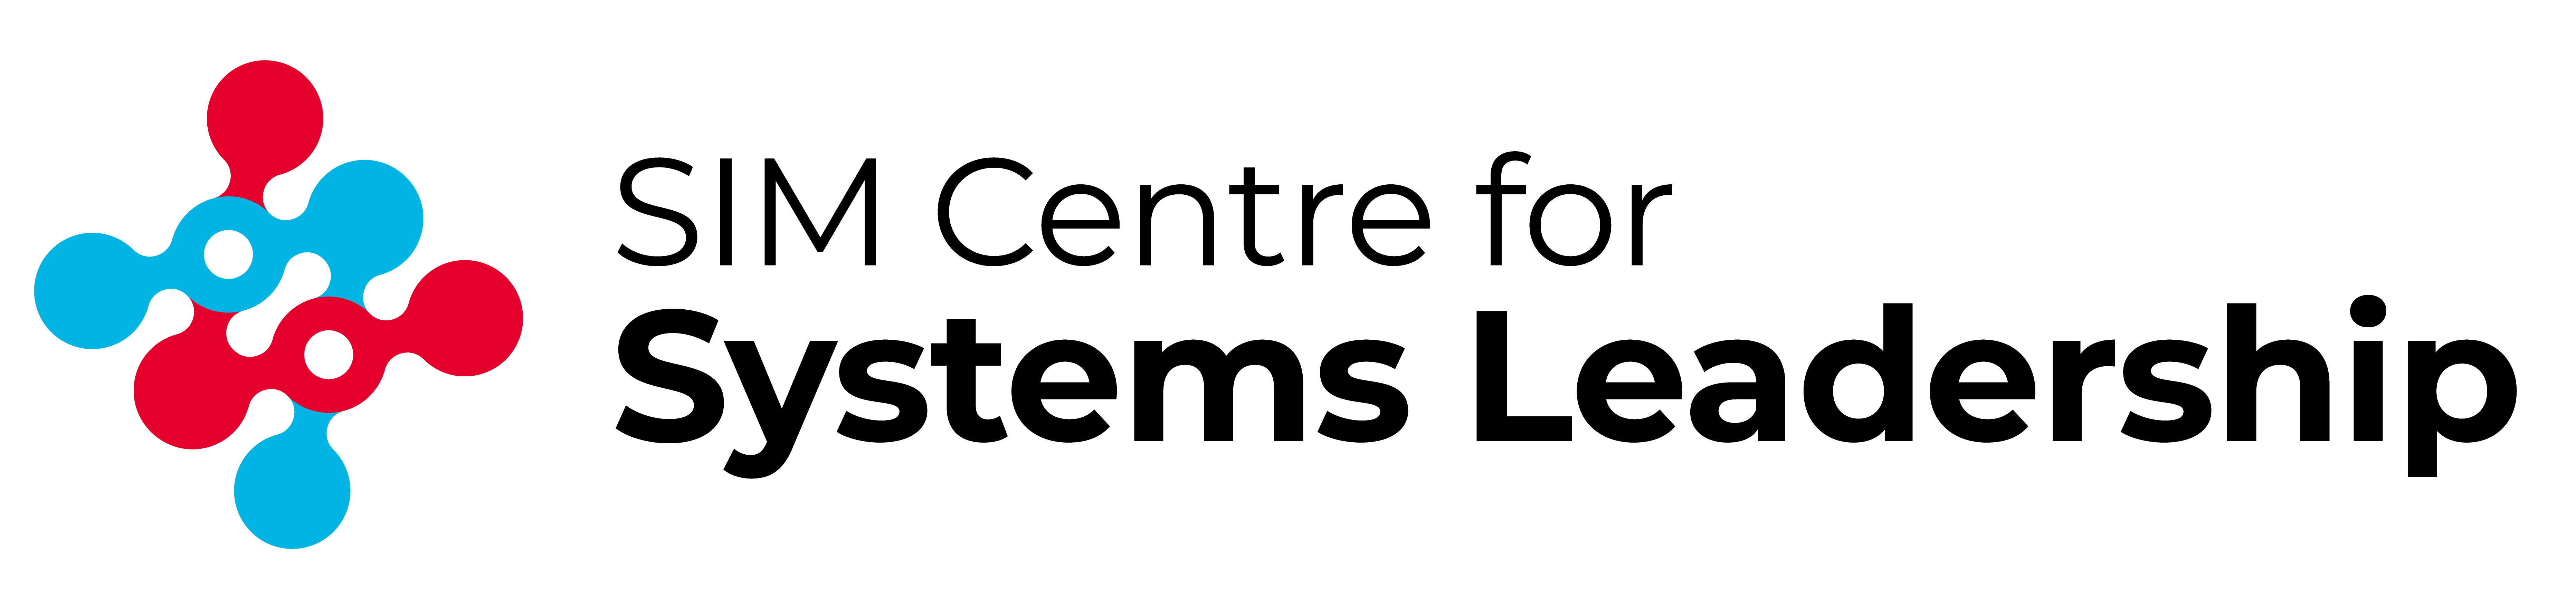 SIM Centre For Systems Leadership